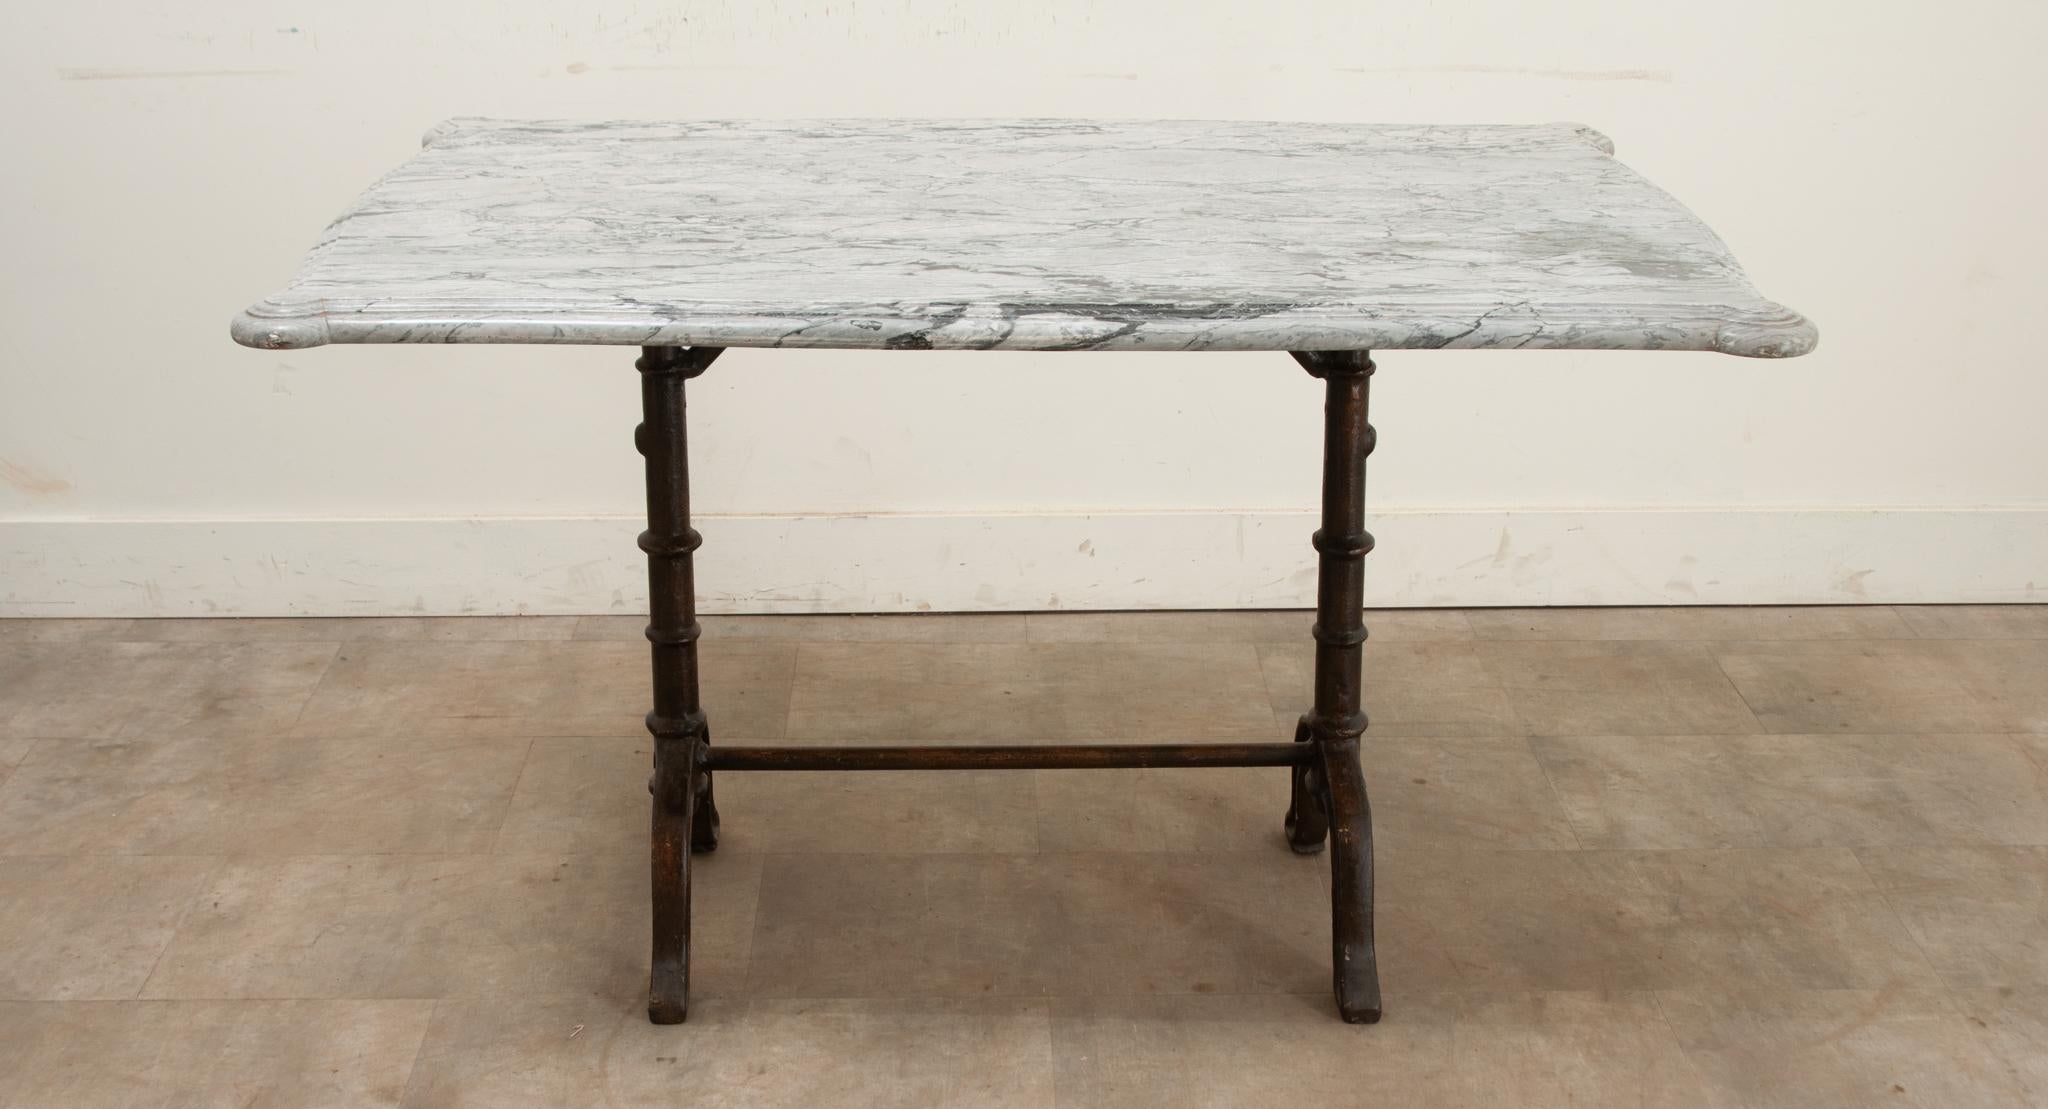 A beautiful garden dining table married together over time. The top is older than its base and is from the 1700’s. It’s a thick slab of marble curved on all four sides and has pronounced rounded corners. The base is made of heavy cast iron and is